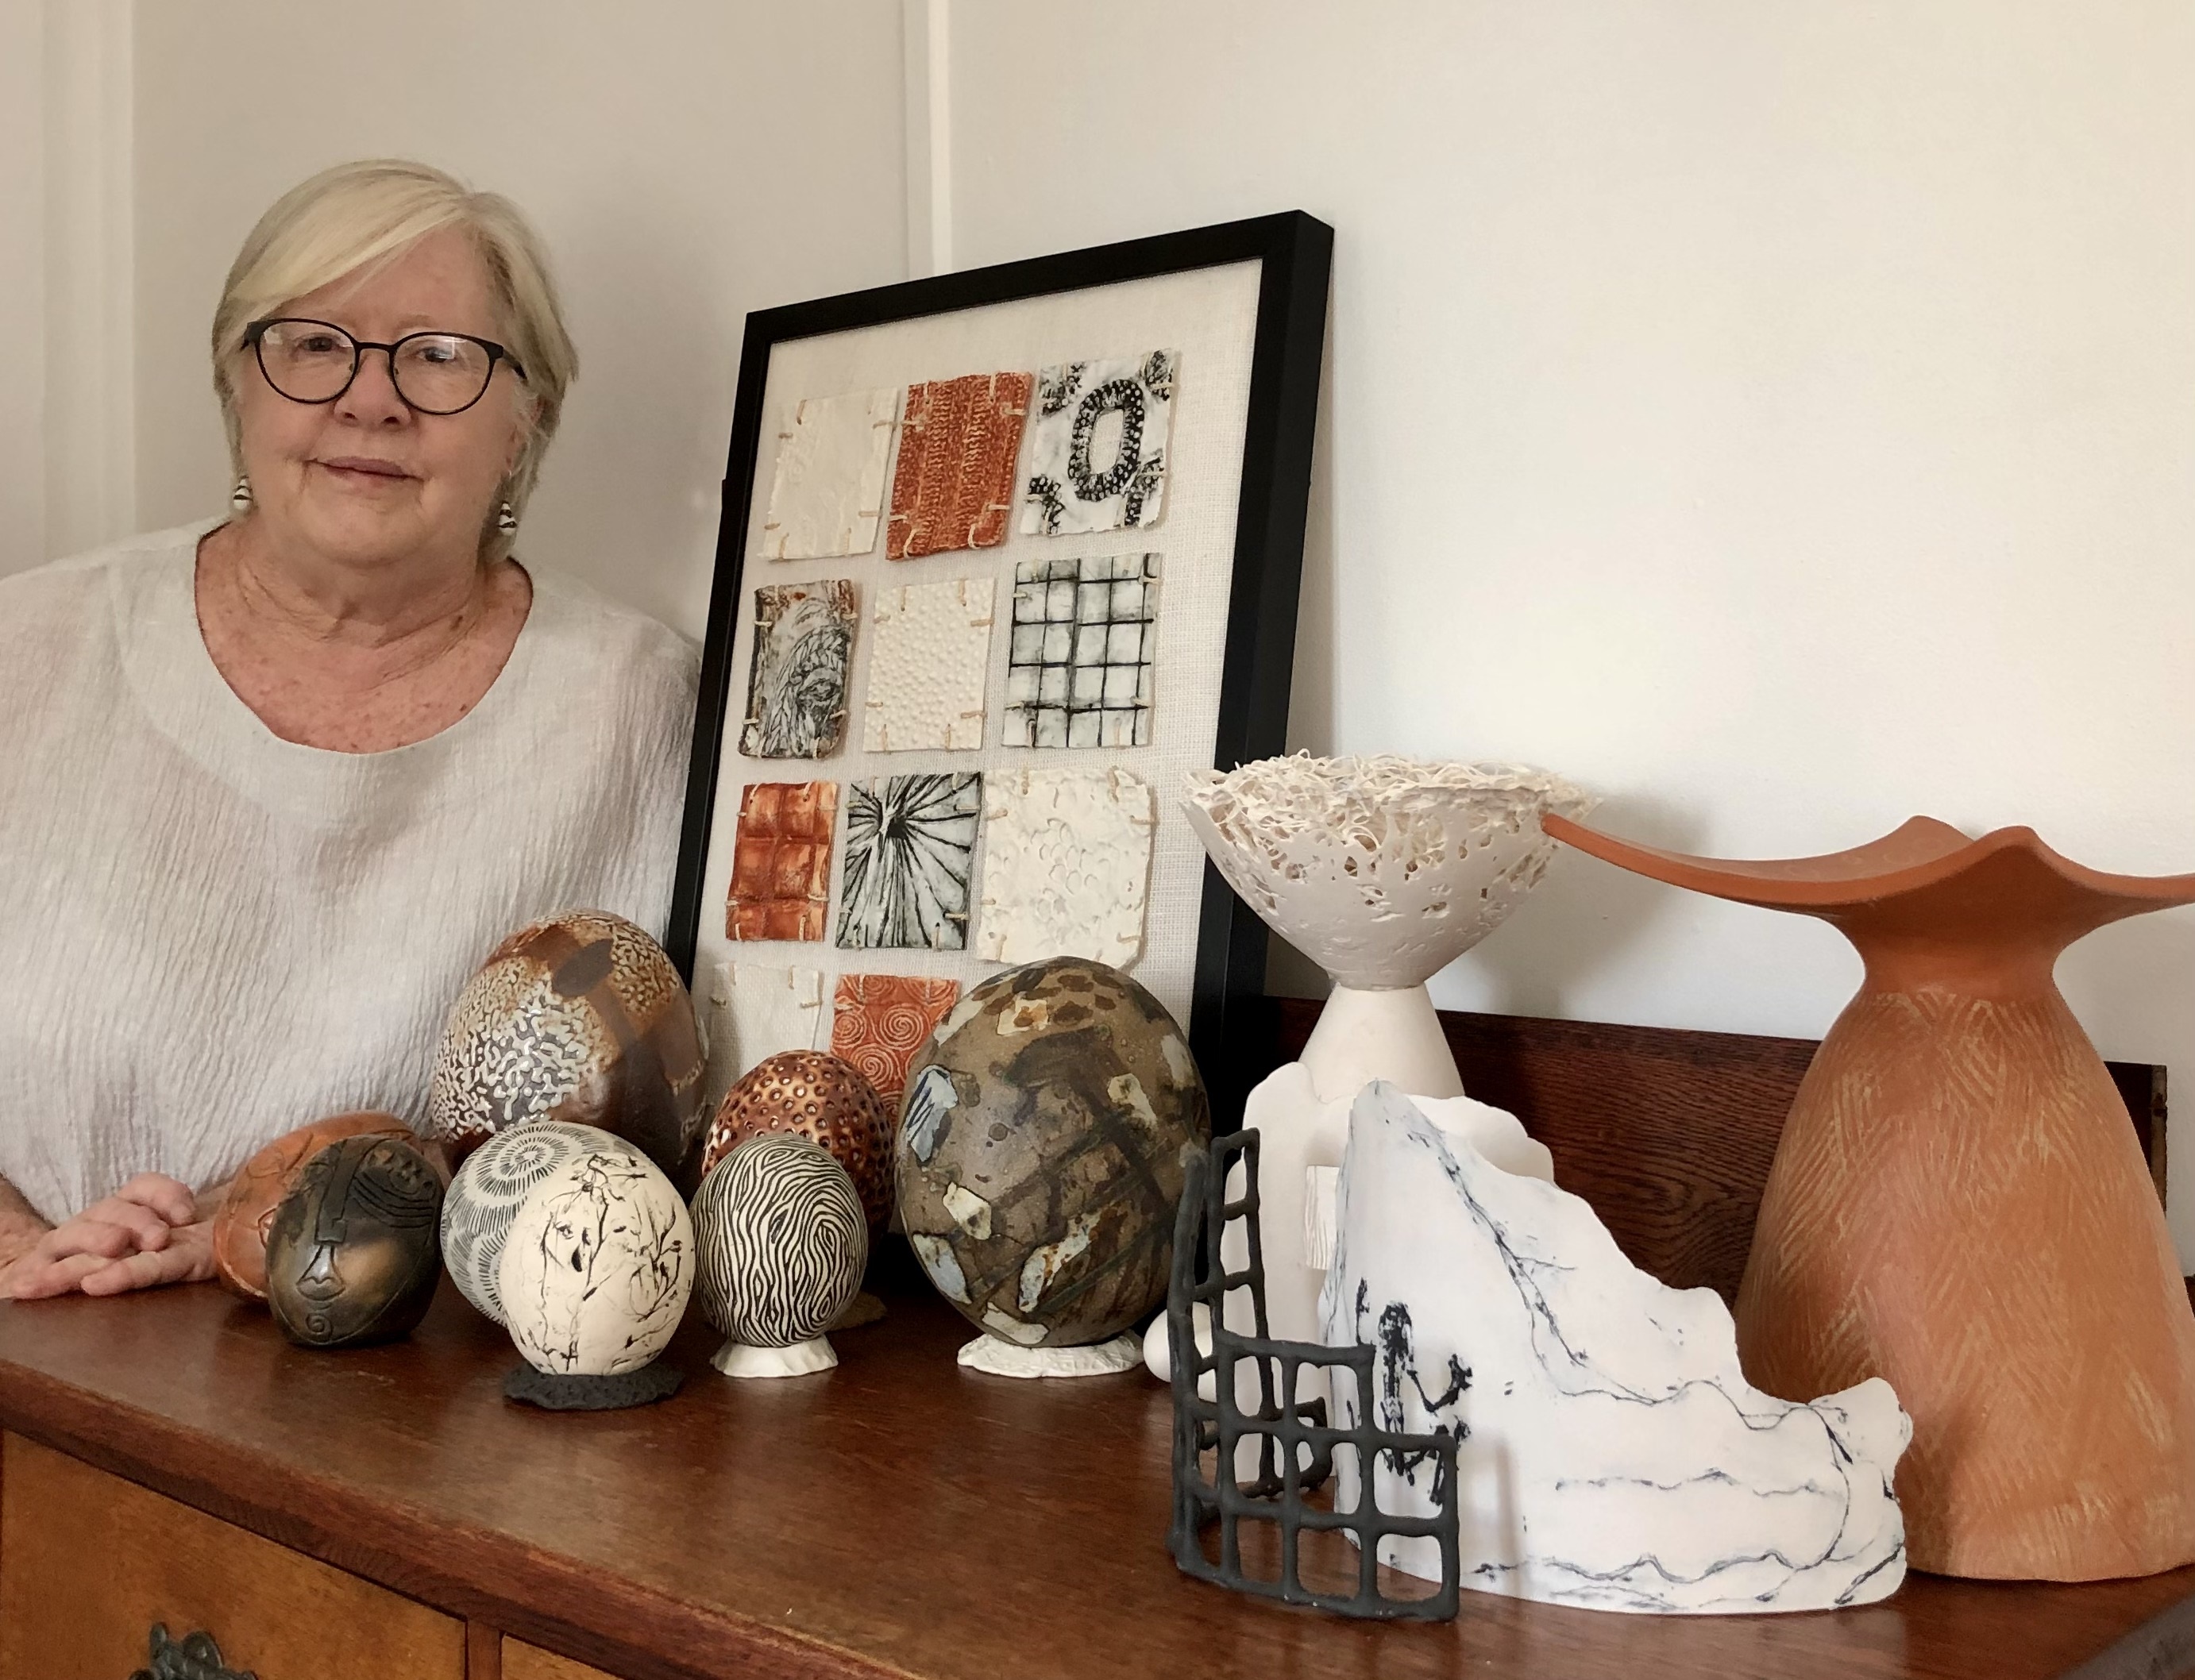 A woman with short white hair and black rimmed glasses standing behind a wooden sideboard with assorted works of pottery in earth tones on display.